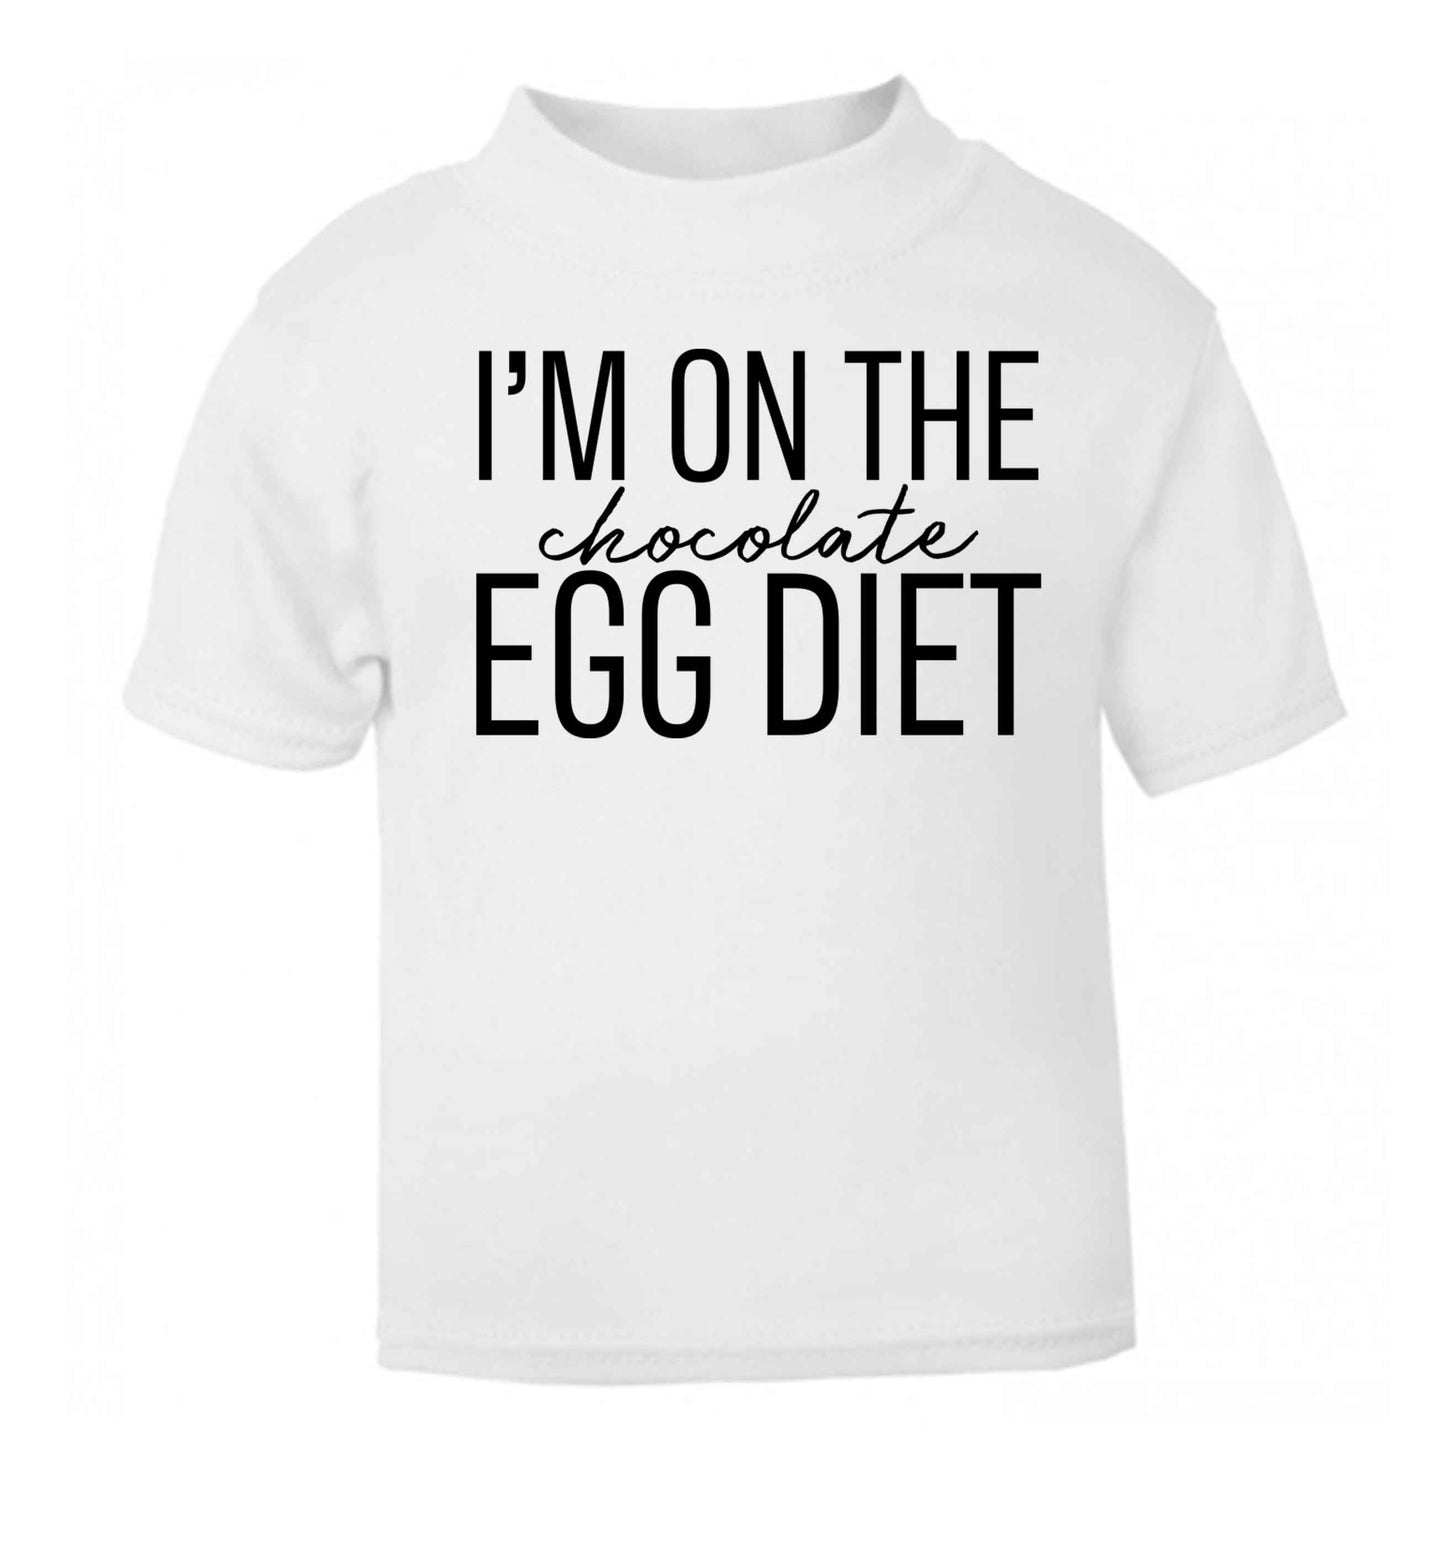 I'm on the chocolate egg diet white baby toddler Tshirt 2 Years